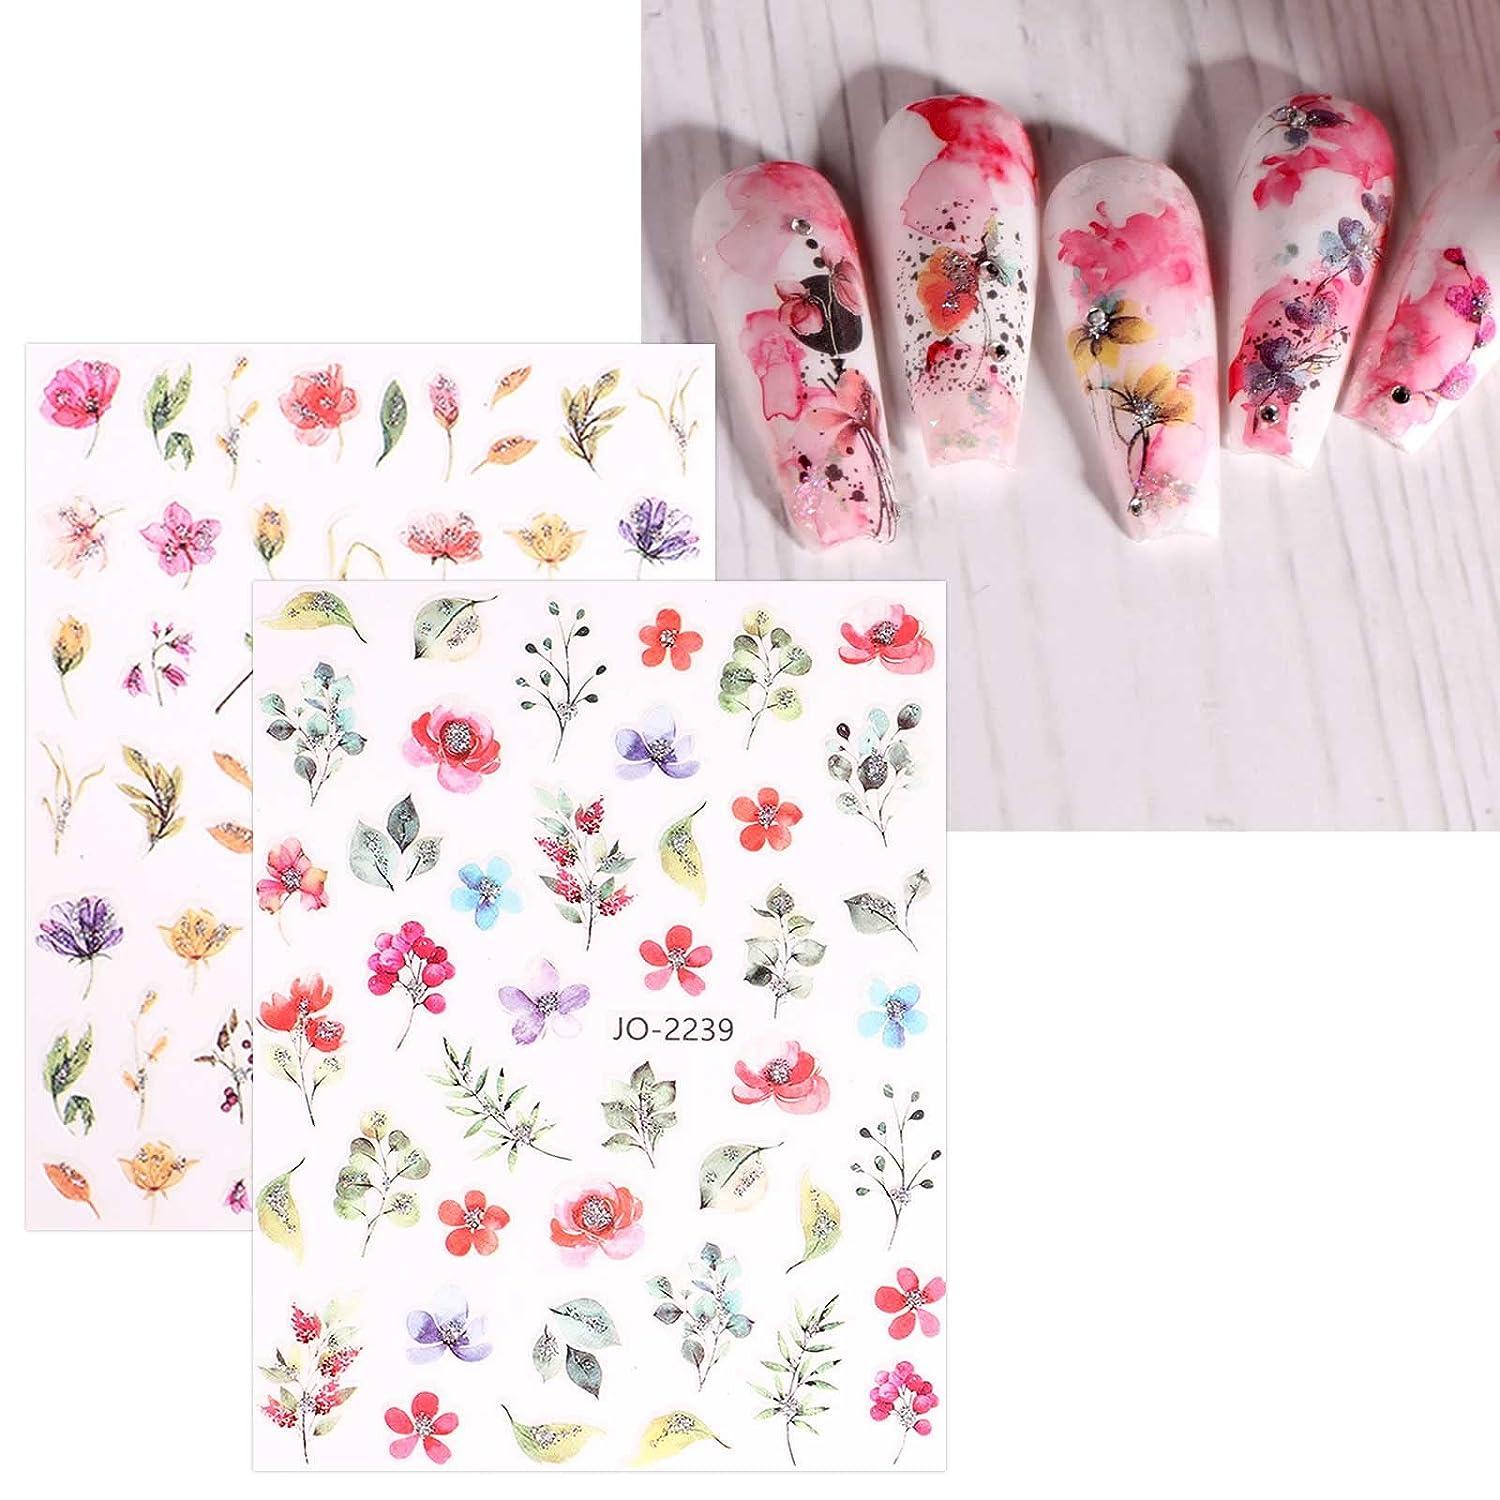 JMEOWIO 12 Sheets Spring Flower Nail Art Stickers Decals Self-Adhesive  Pegatinas Uñas Leaves Pink Nail Supplies Nail Art Design Decoration  Accessories